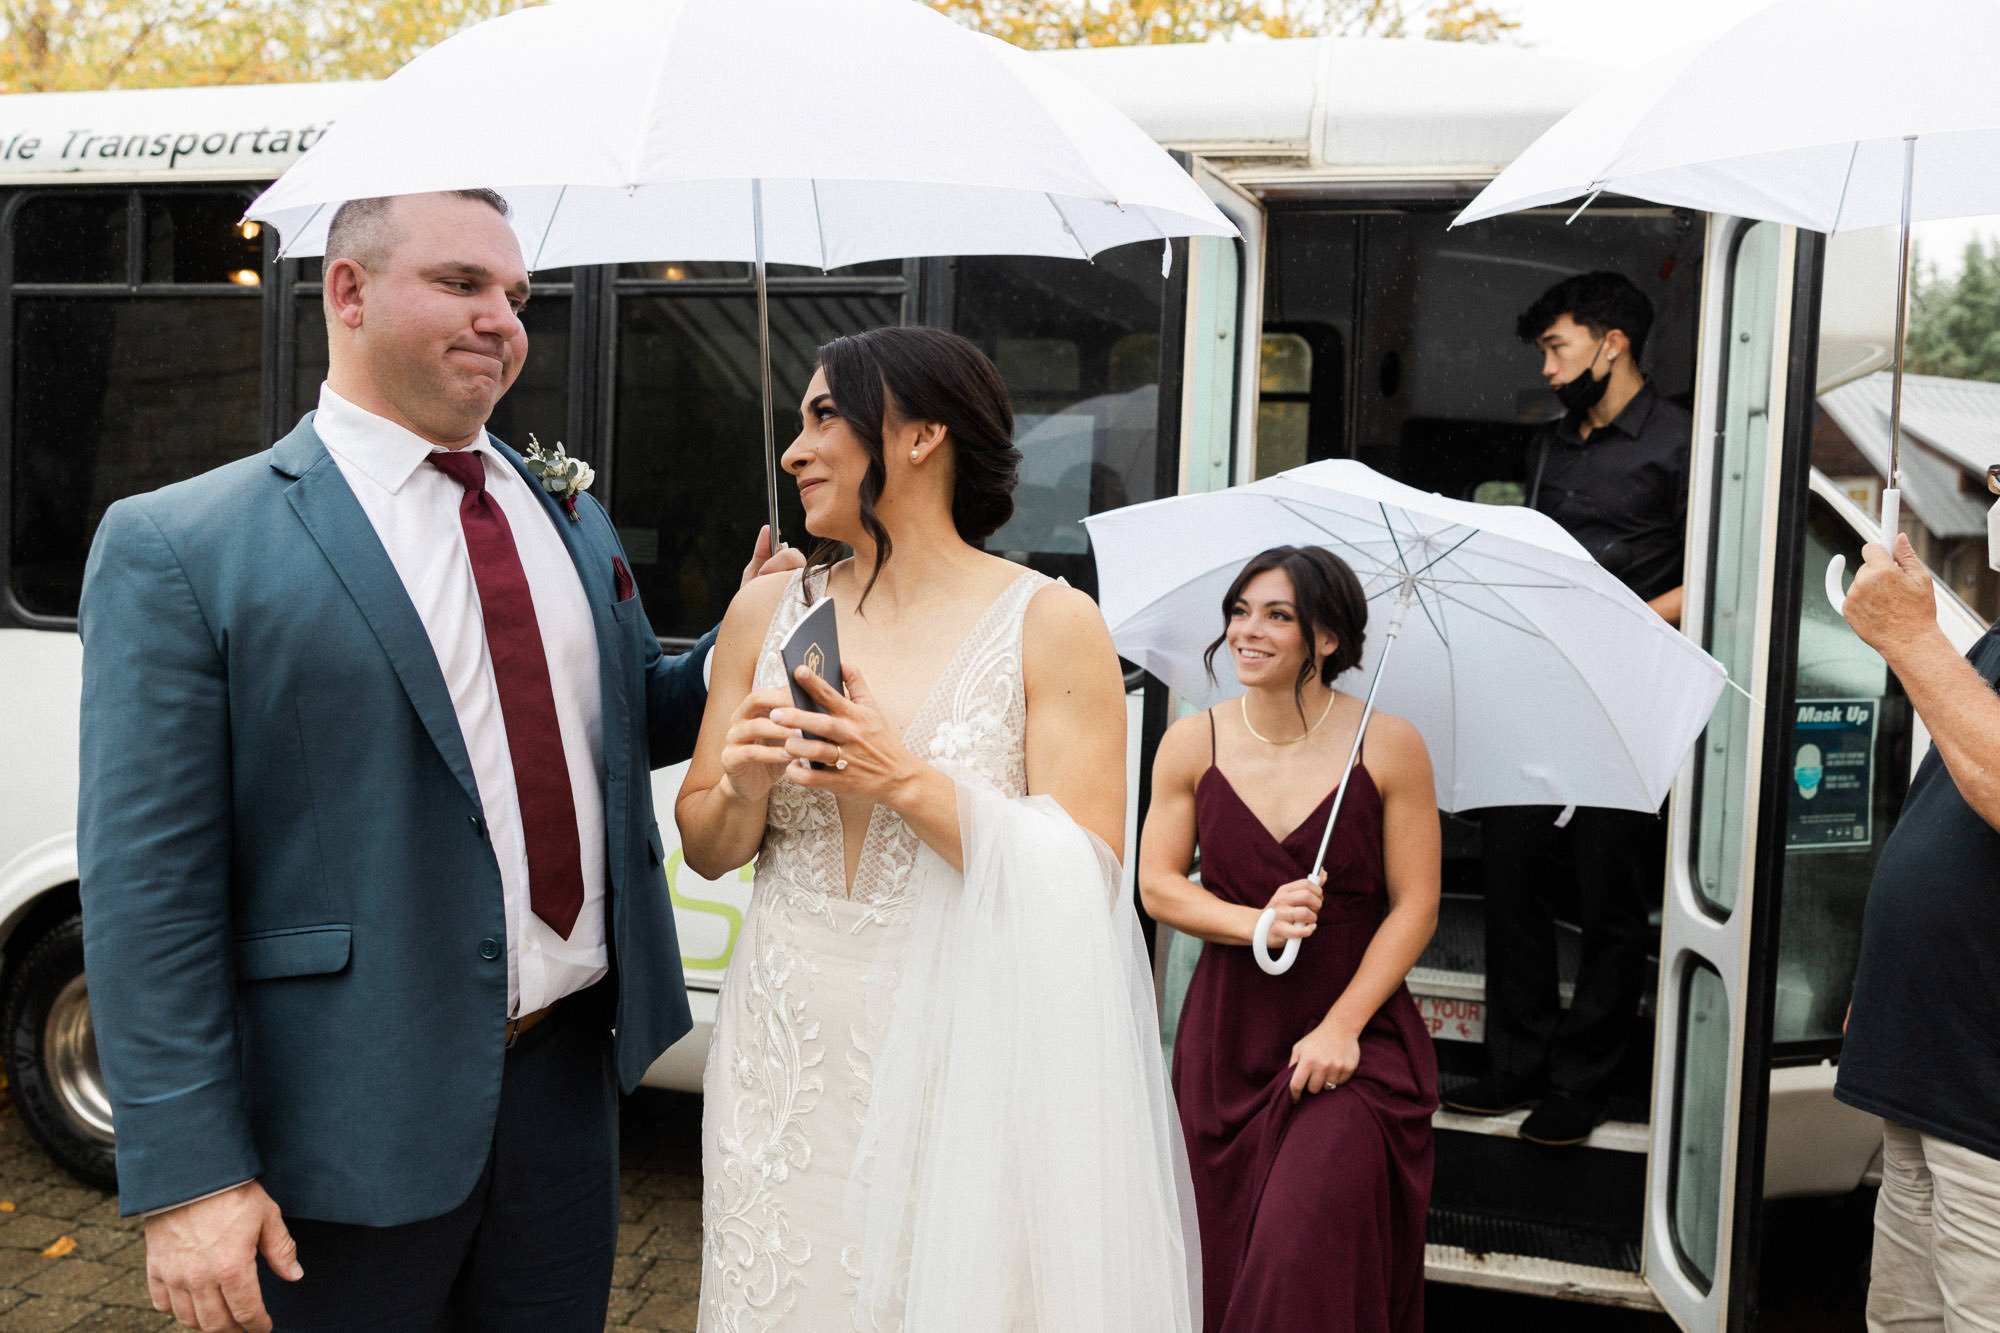 woman in burgundy dress holding white umbrella exits bus behind bride in white dress and groomsmen in navy blue suit holding white umbrella